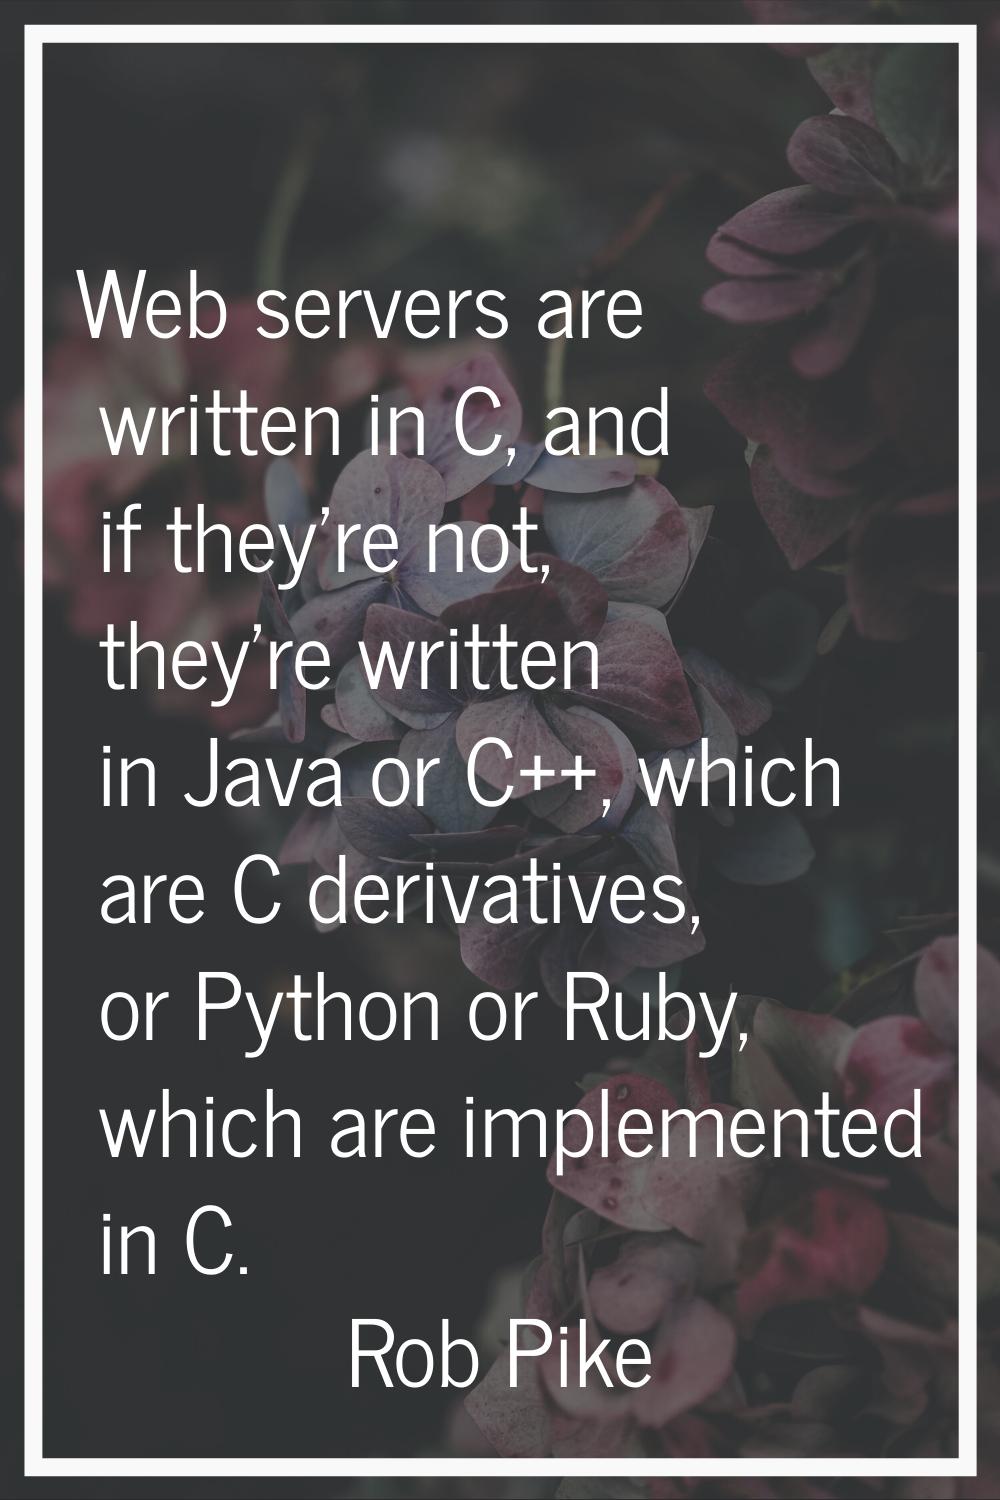 Web servers are written in C, and if they're not, they're written in Java or C++, which are C deriv